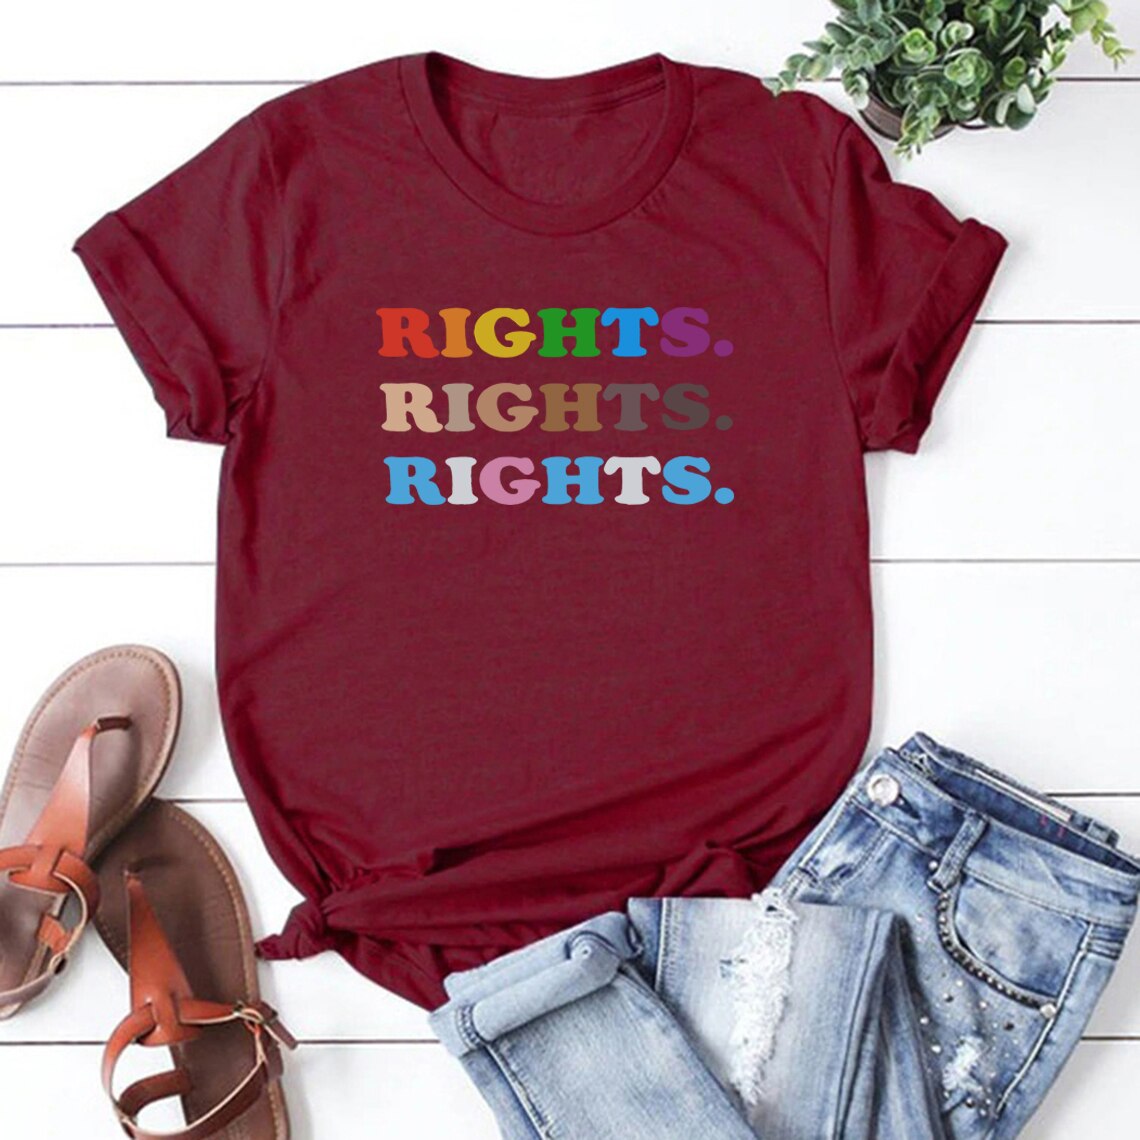 Rights Pride T-shirt